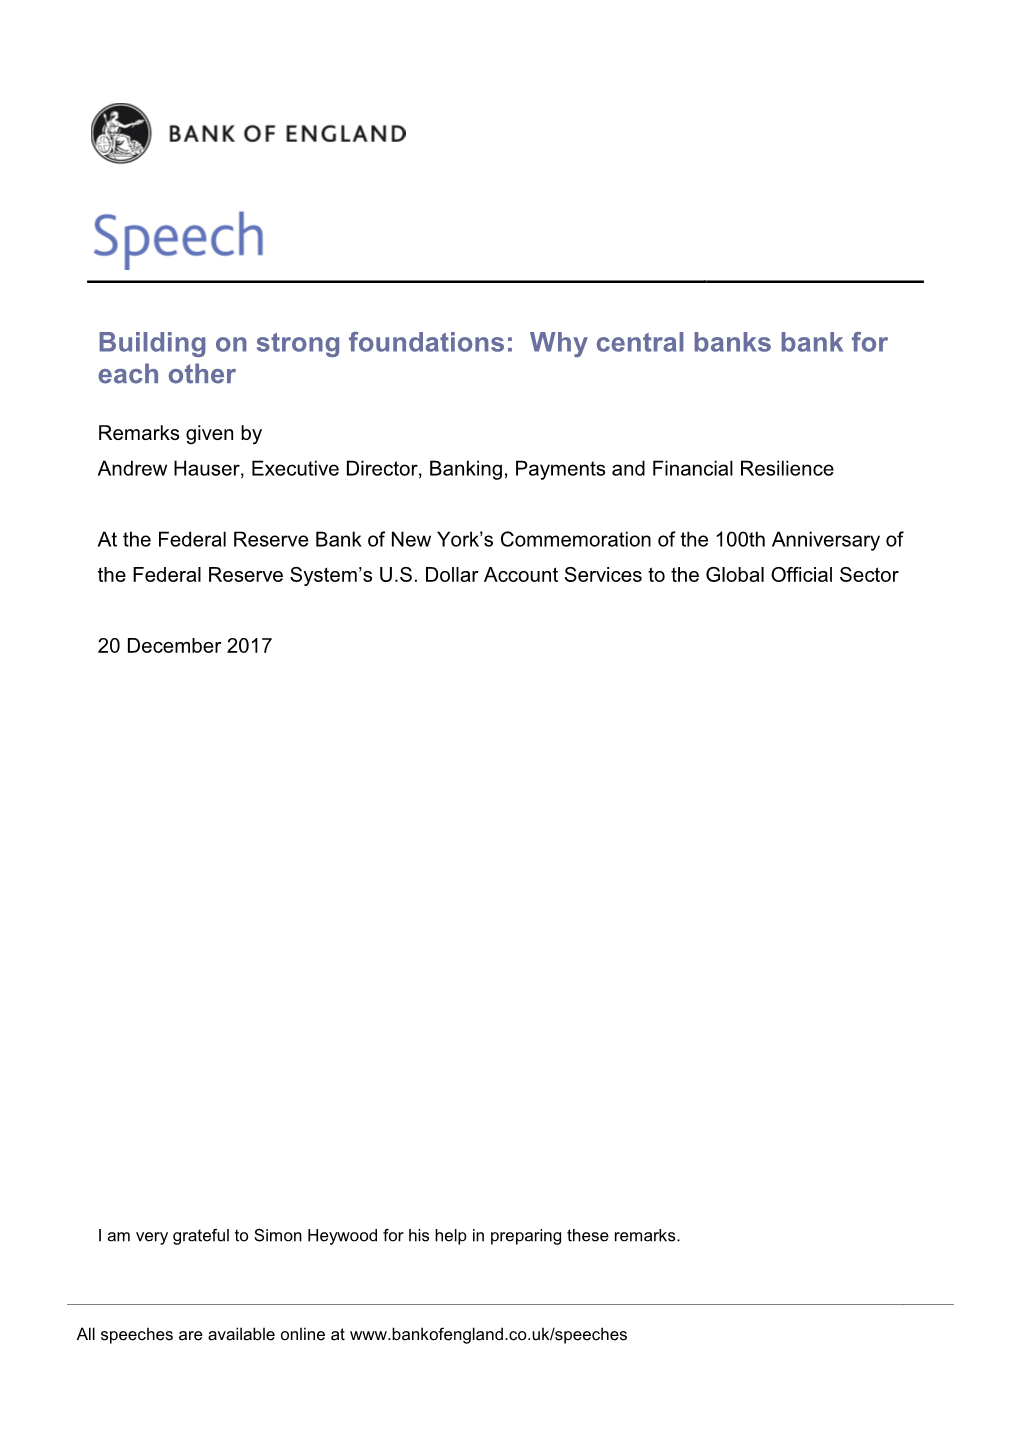 Speech by Andrew Hauser at the New York Federal Reserve Bank